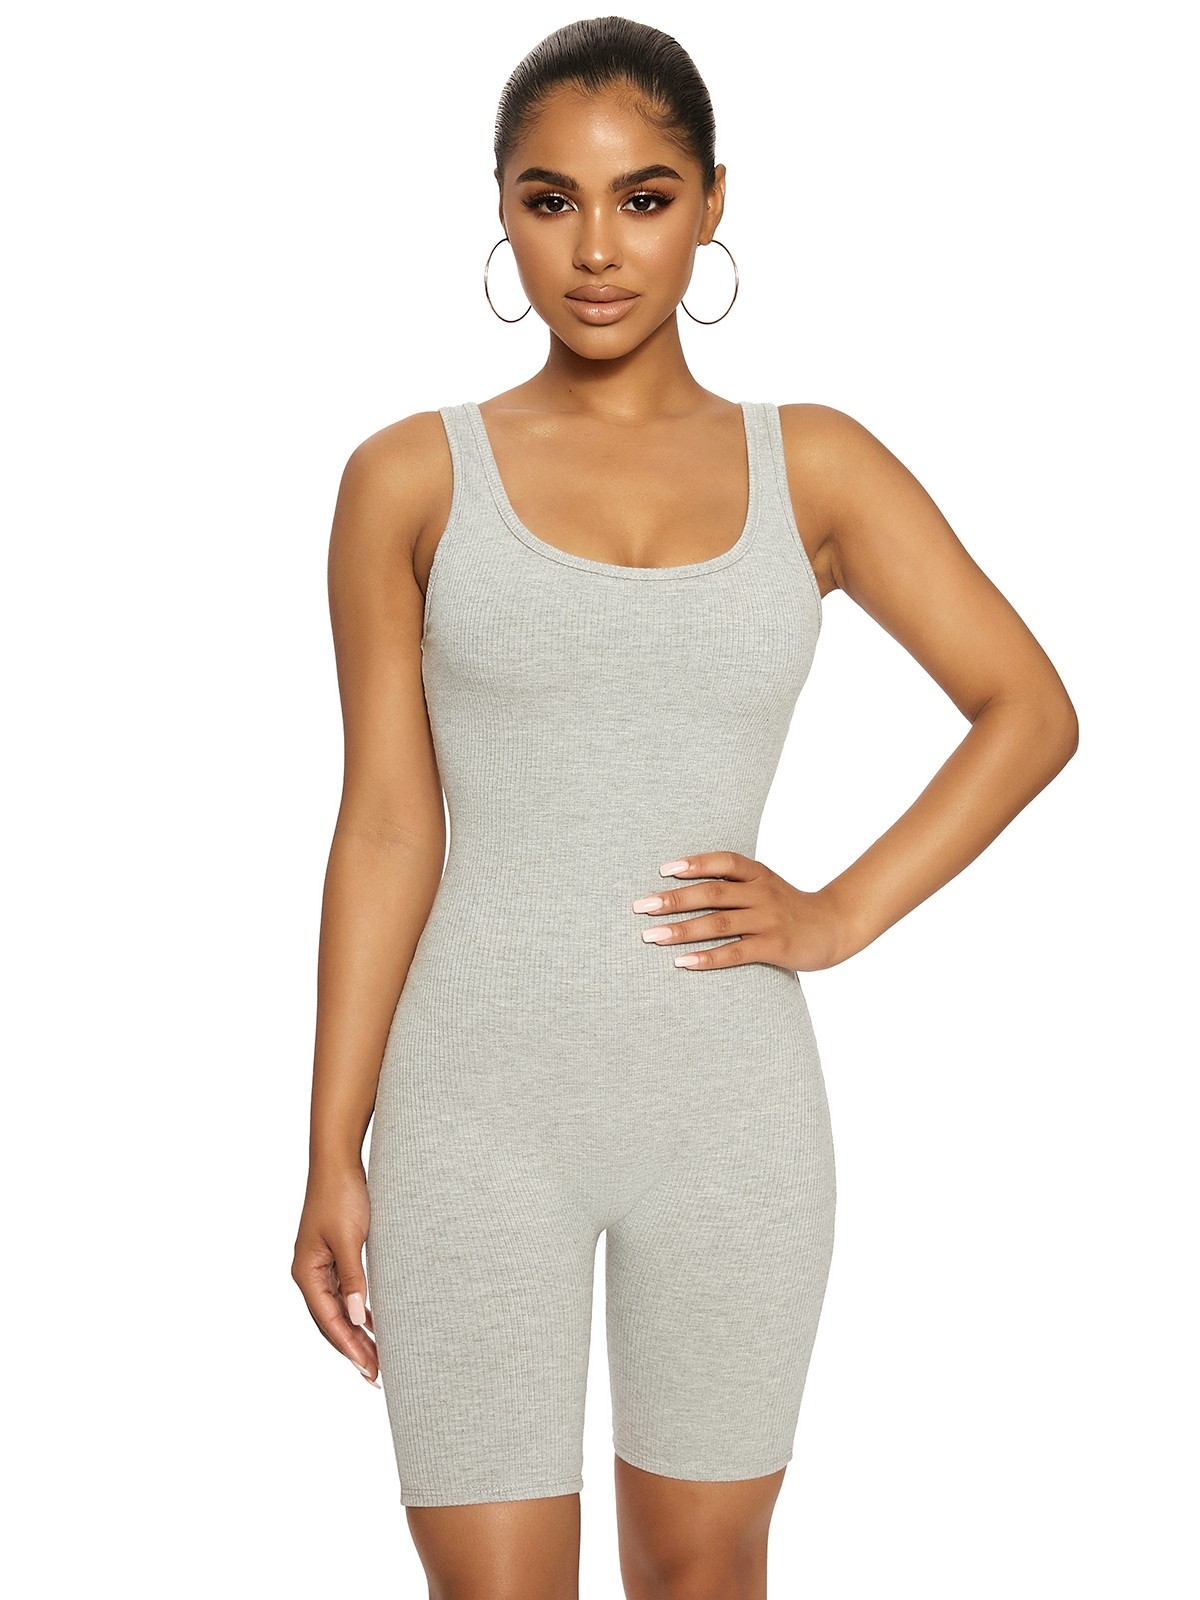 Basic Sports Rompers in Gray US$ 4.75 - www.lover-pretty.com